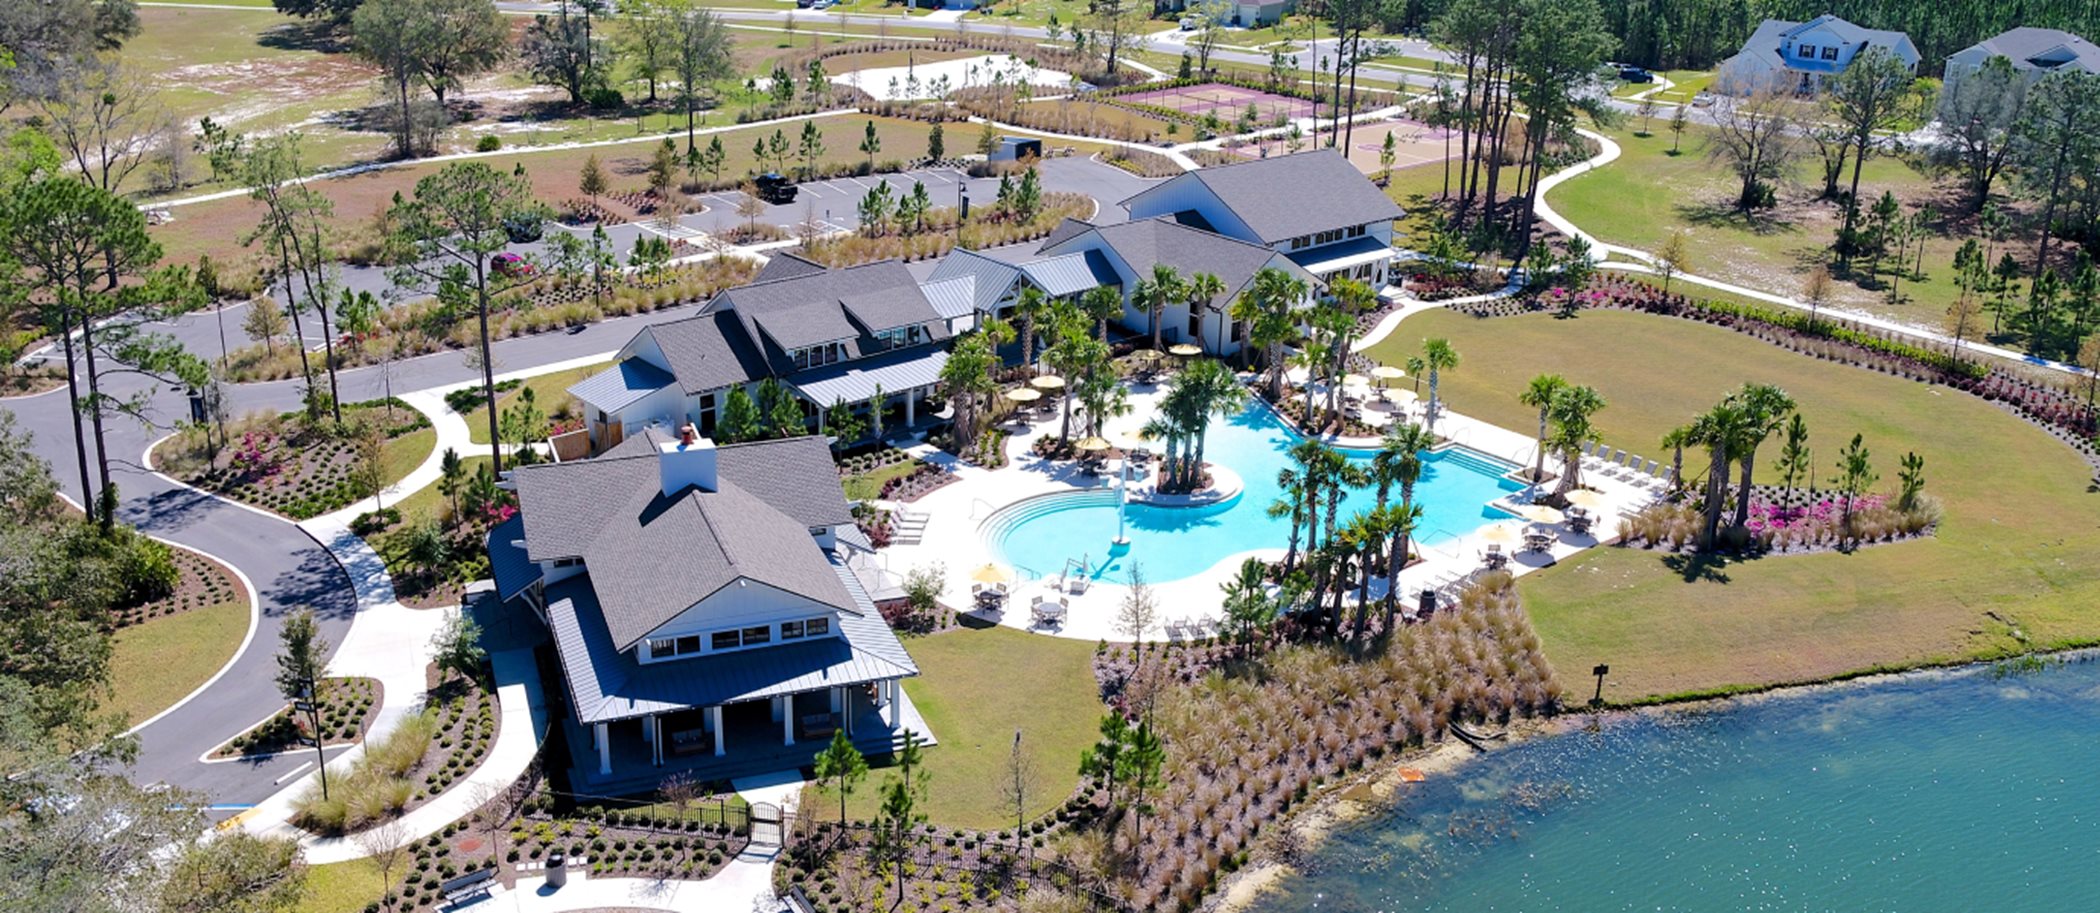 Aerial view of Trailmark Clubhouse and swimming pool